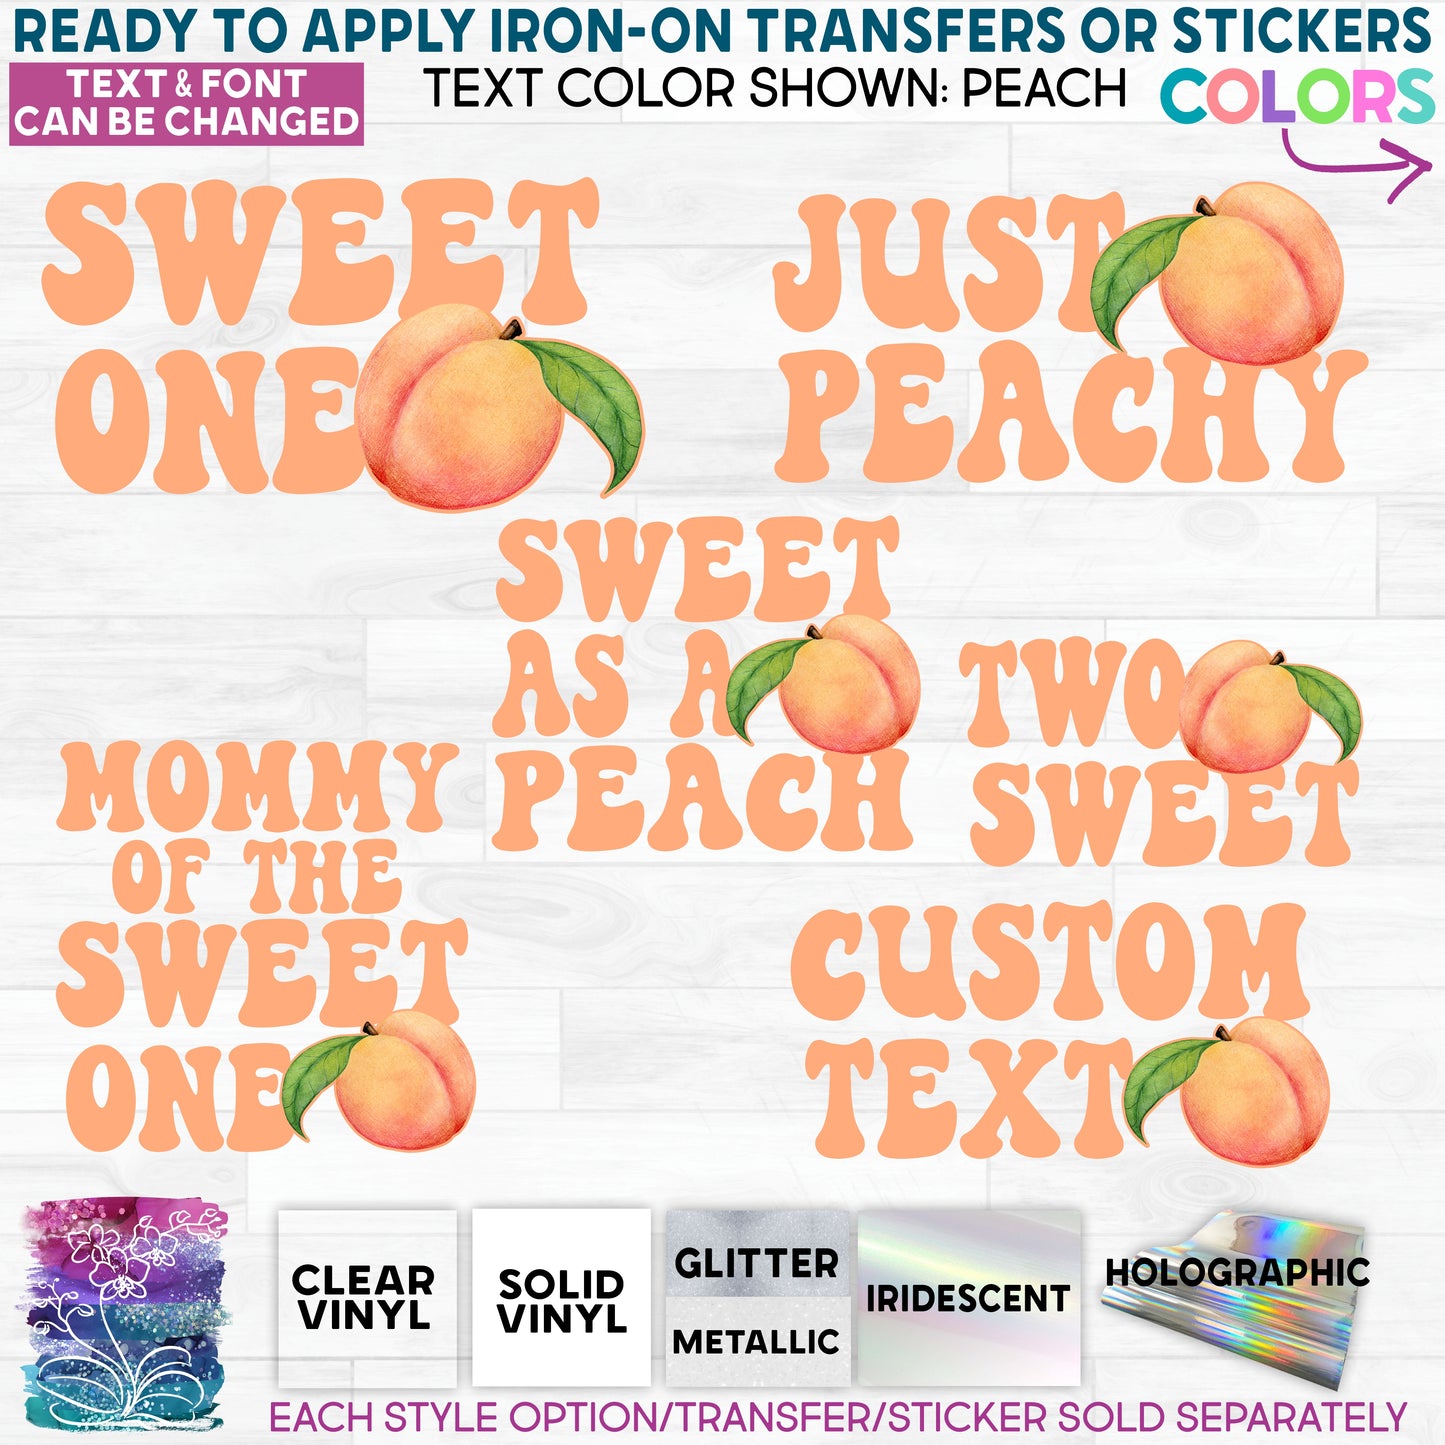 (s415-4) Watercolor Peach Family of the Sweet One Glitter or Vinyl Iron-On Transfer or Sticker